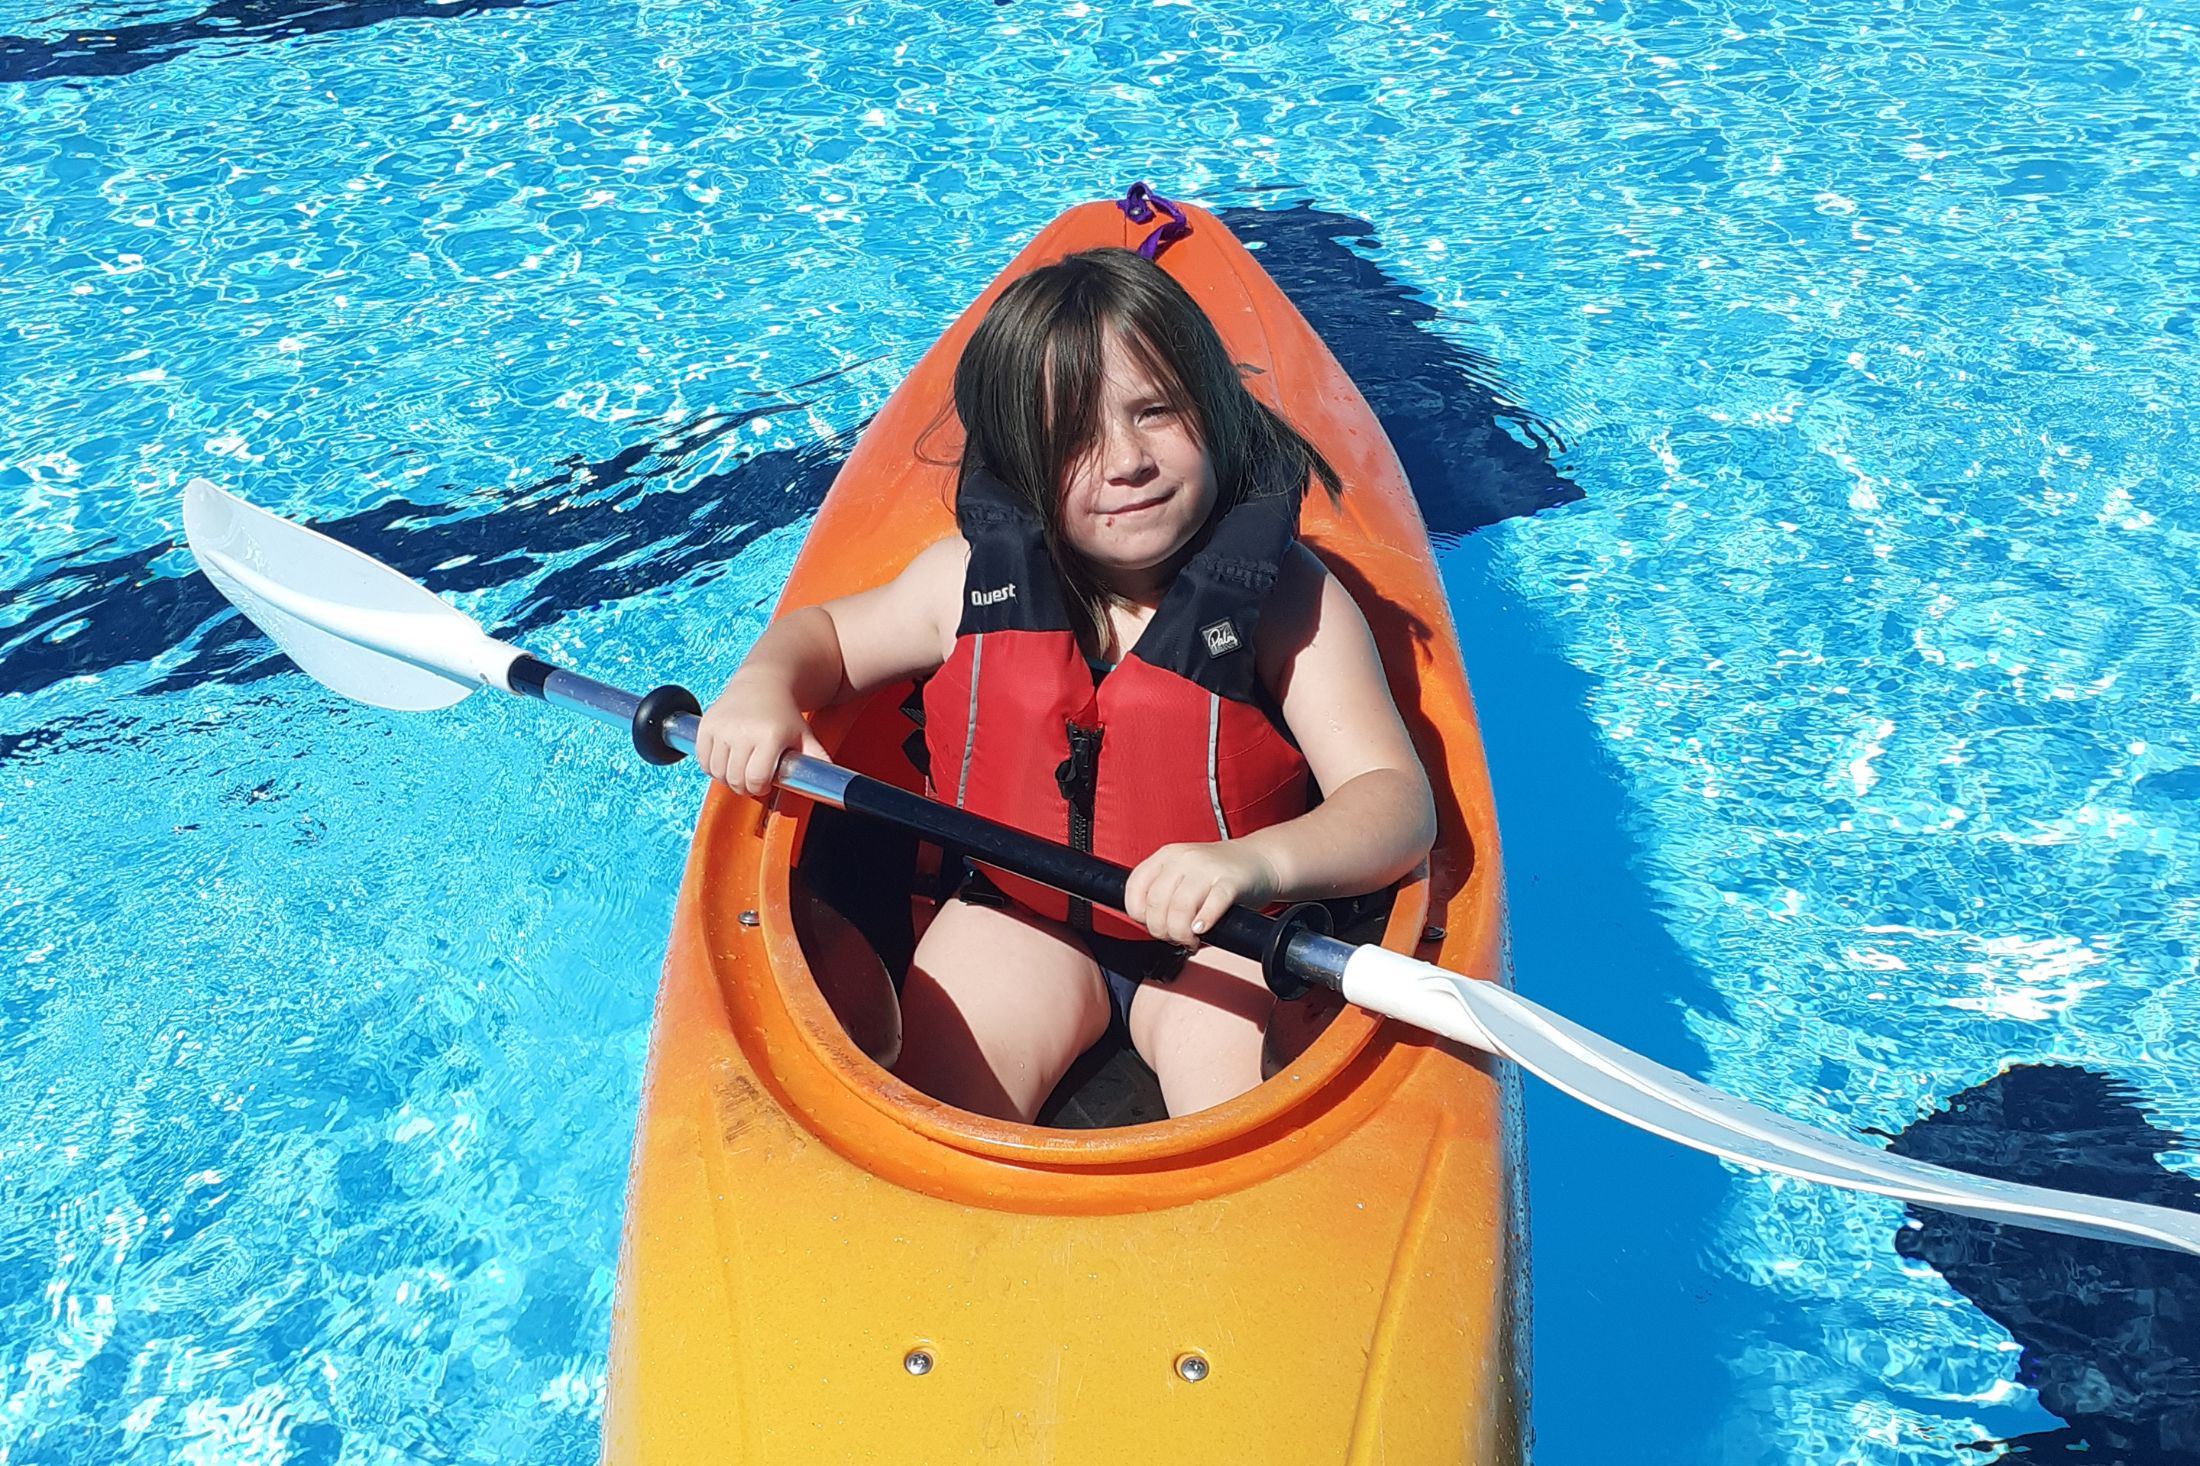 Kayaking with Room 9